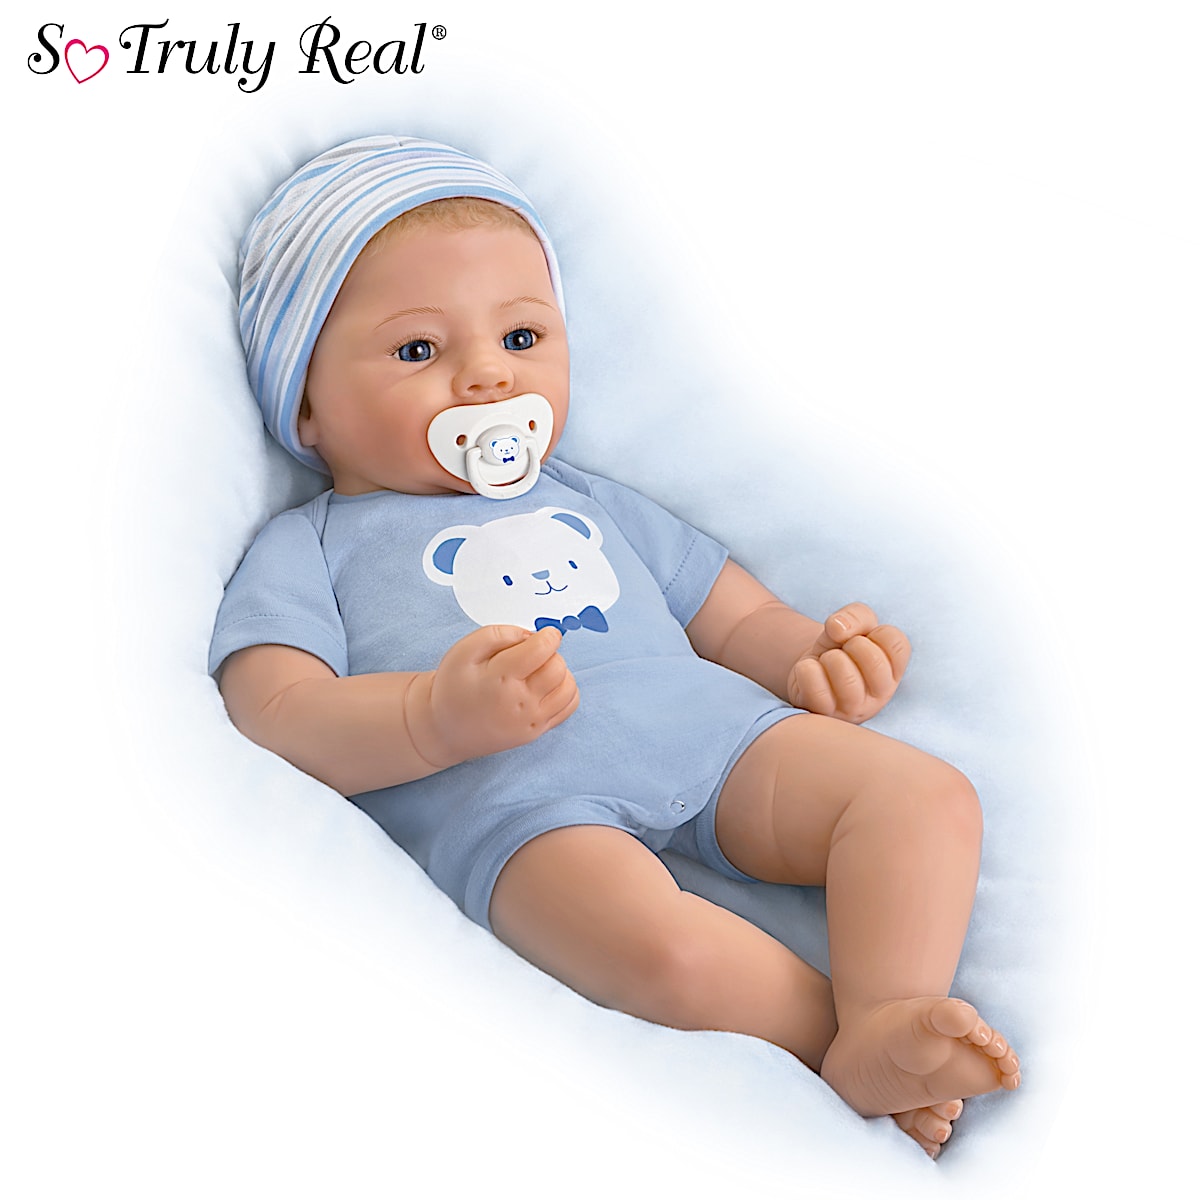 So Truly Real Little Buddy Vinyl Doll Feel Like Newborn With Magnetic Pacifier